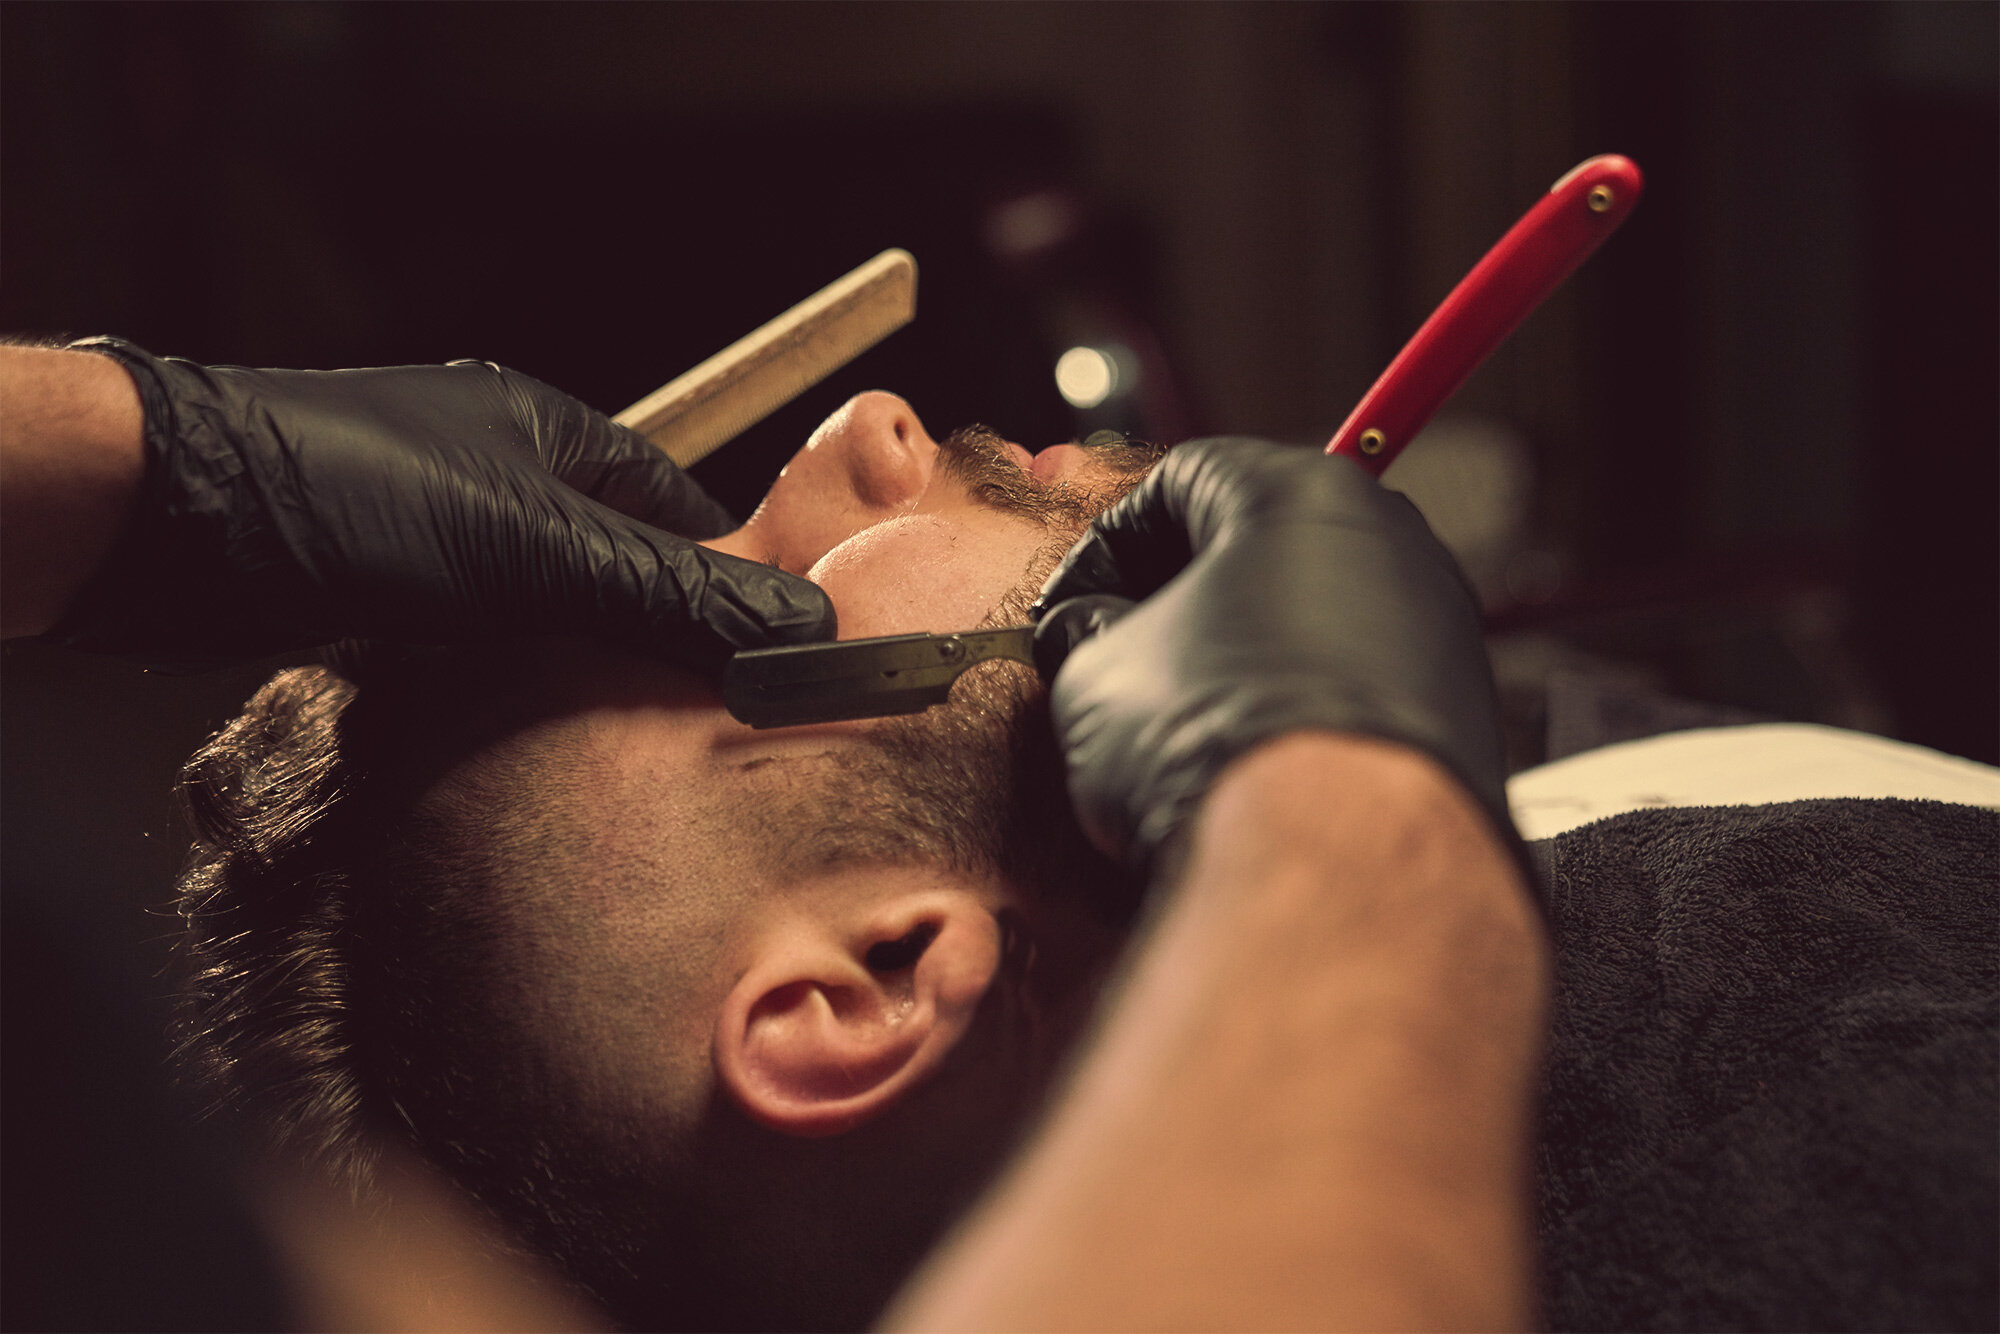 The Best Locations to Open a Barbershop - 2022